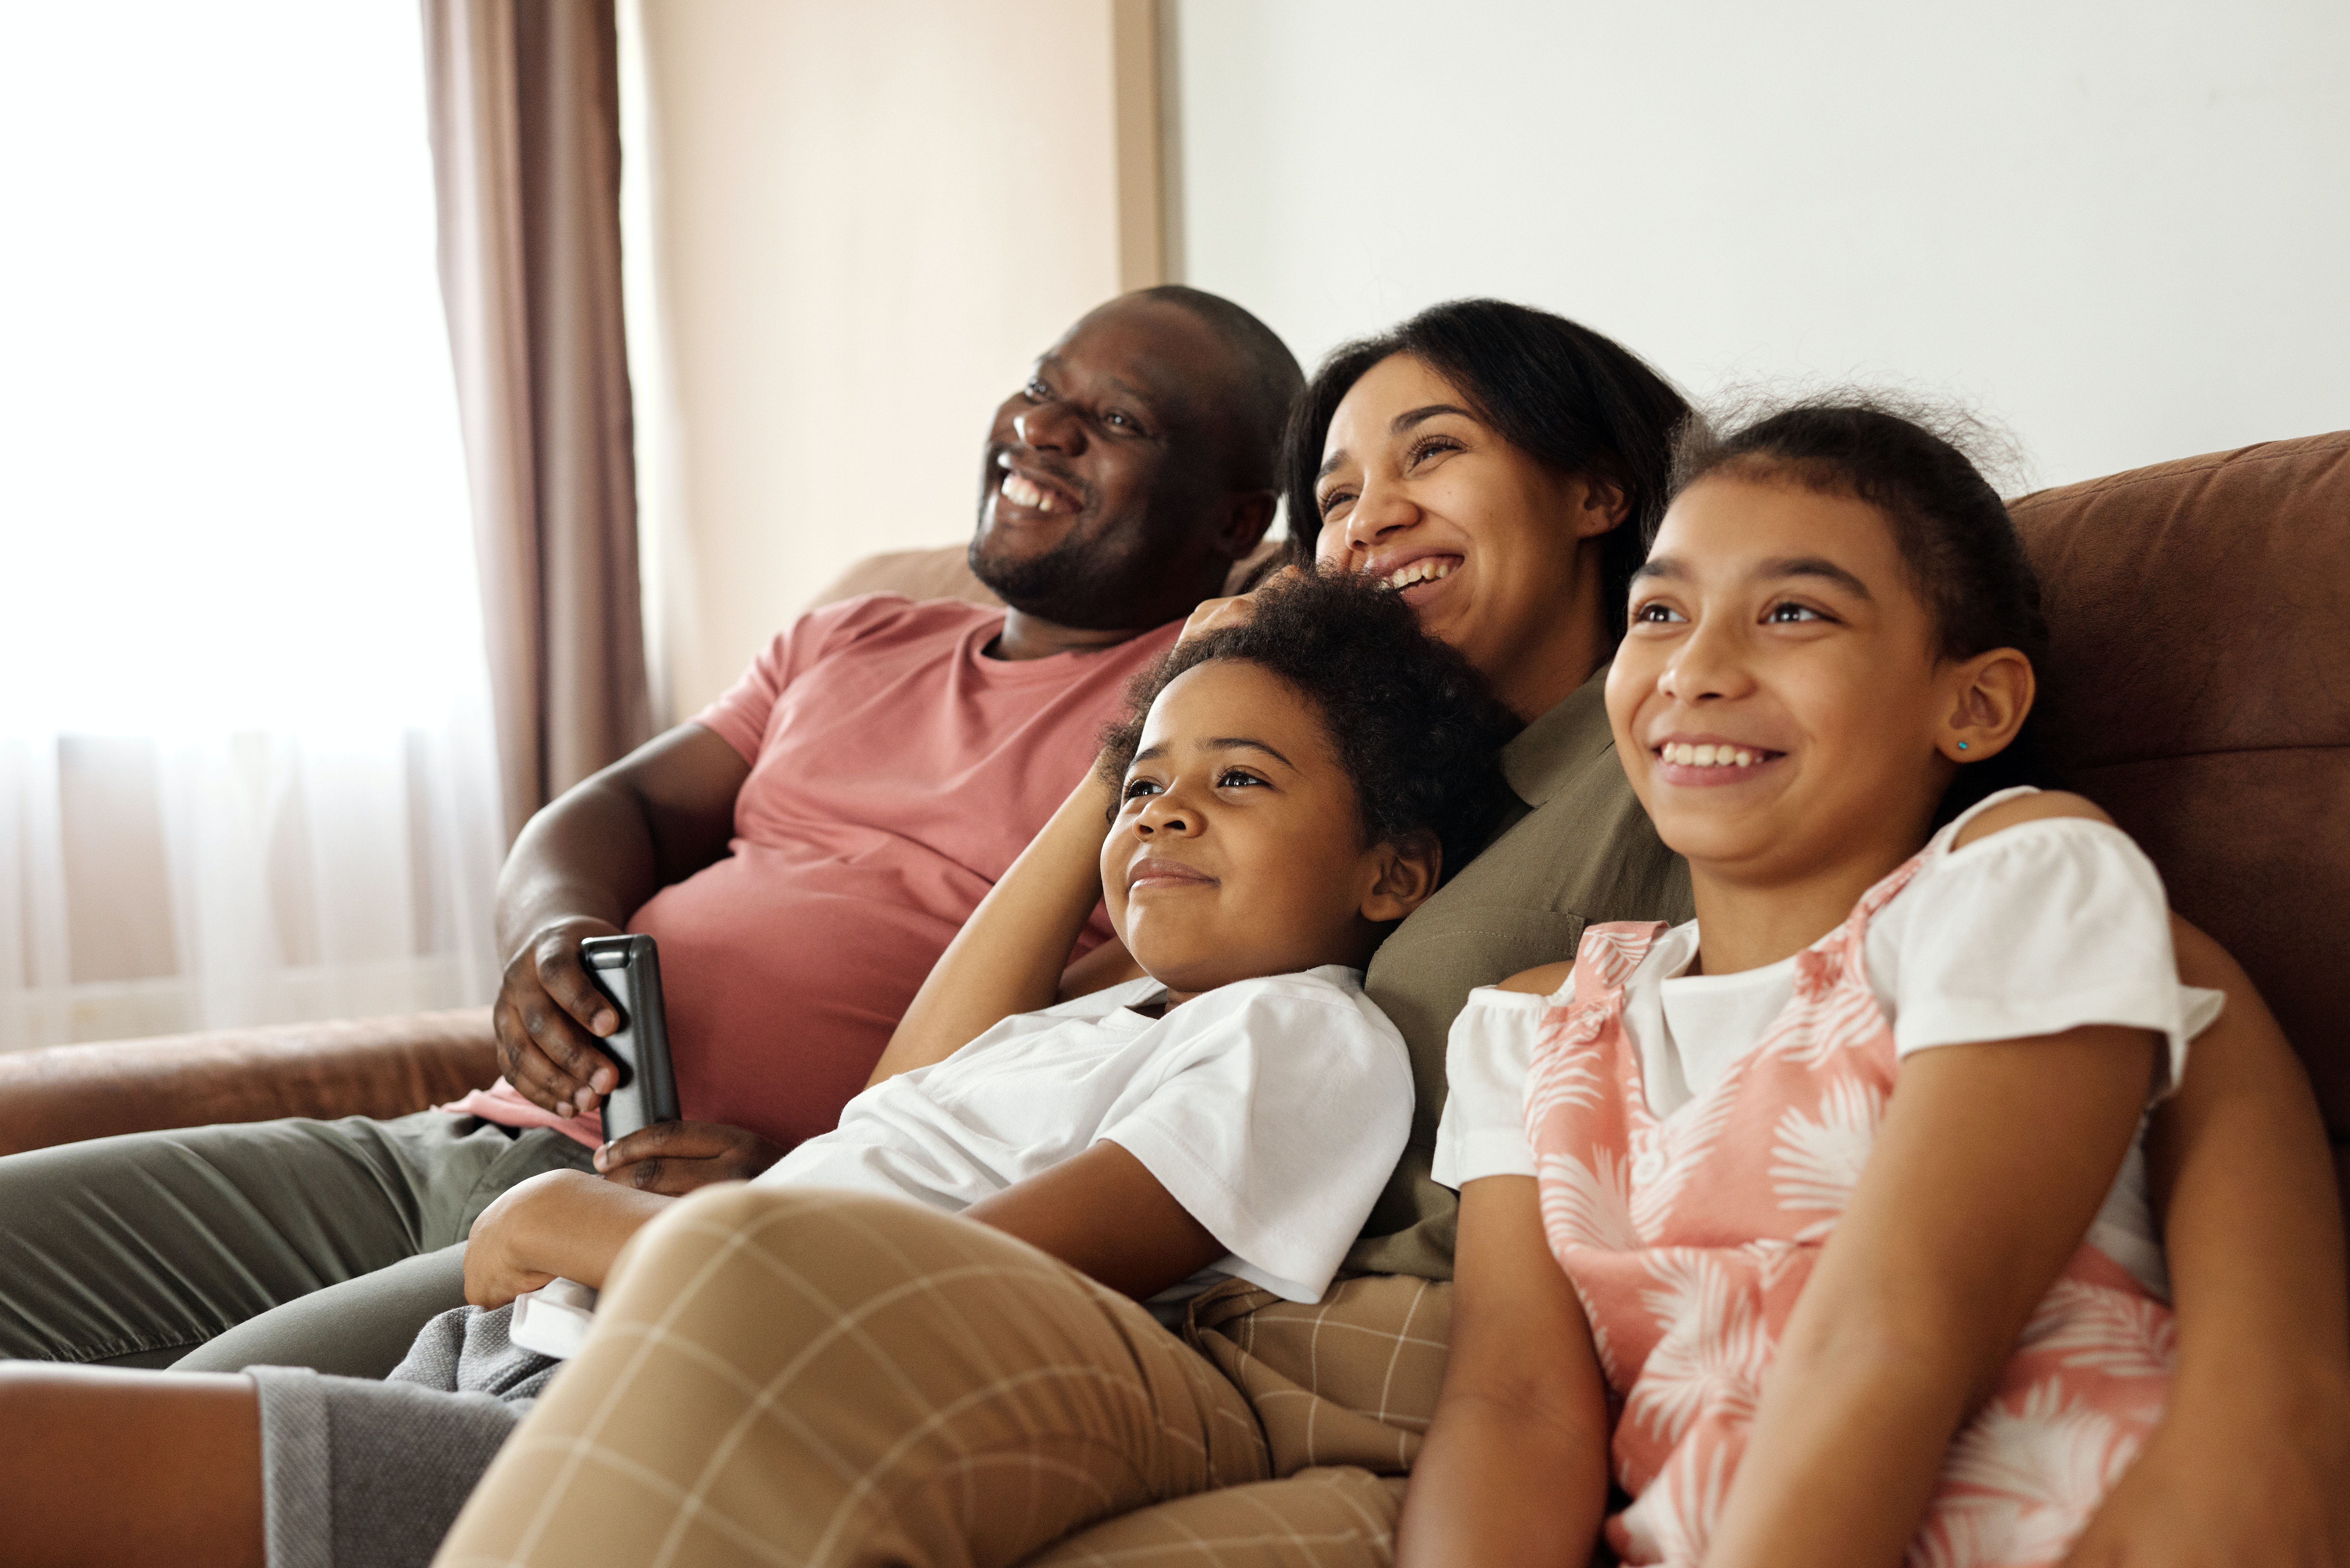 Happy Family Sitting on a Couch and .pexels.com